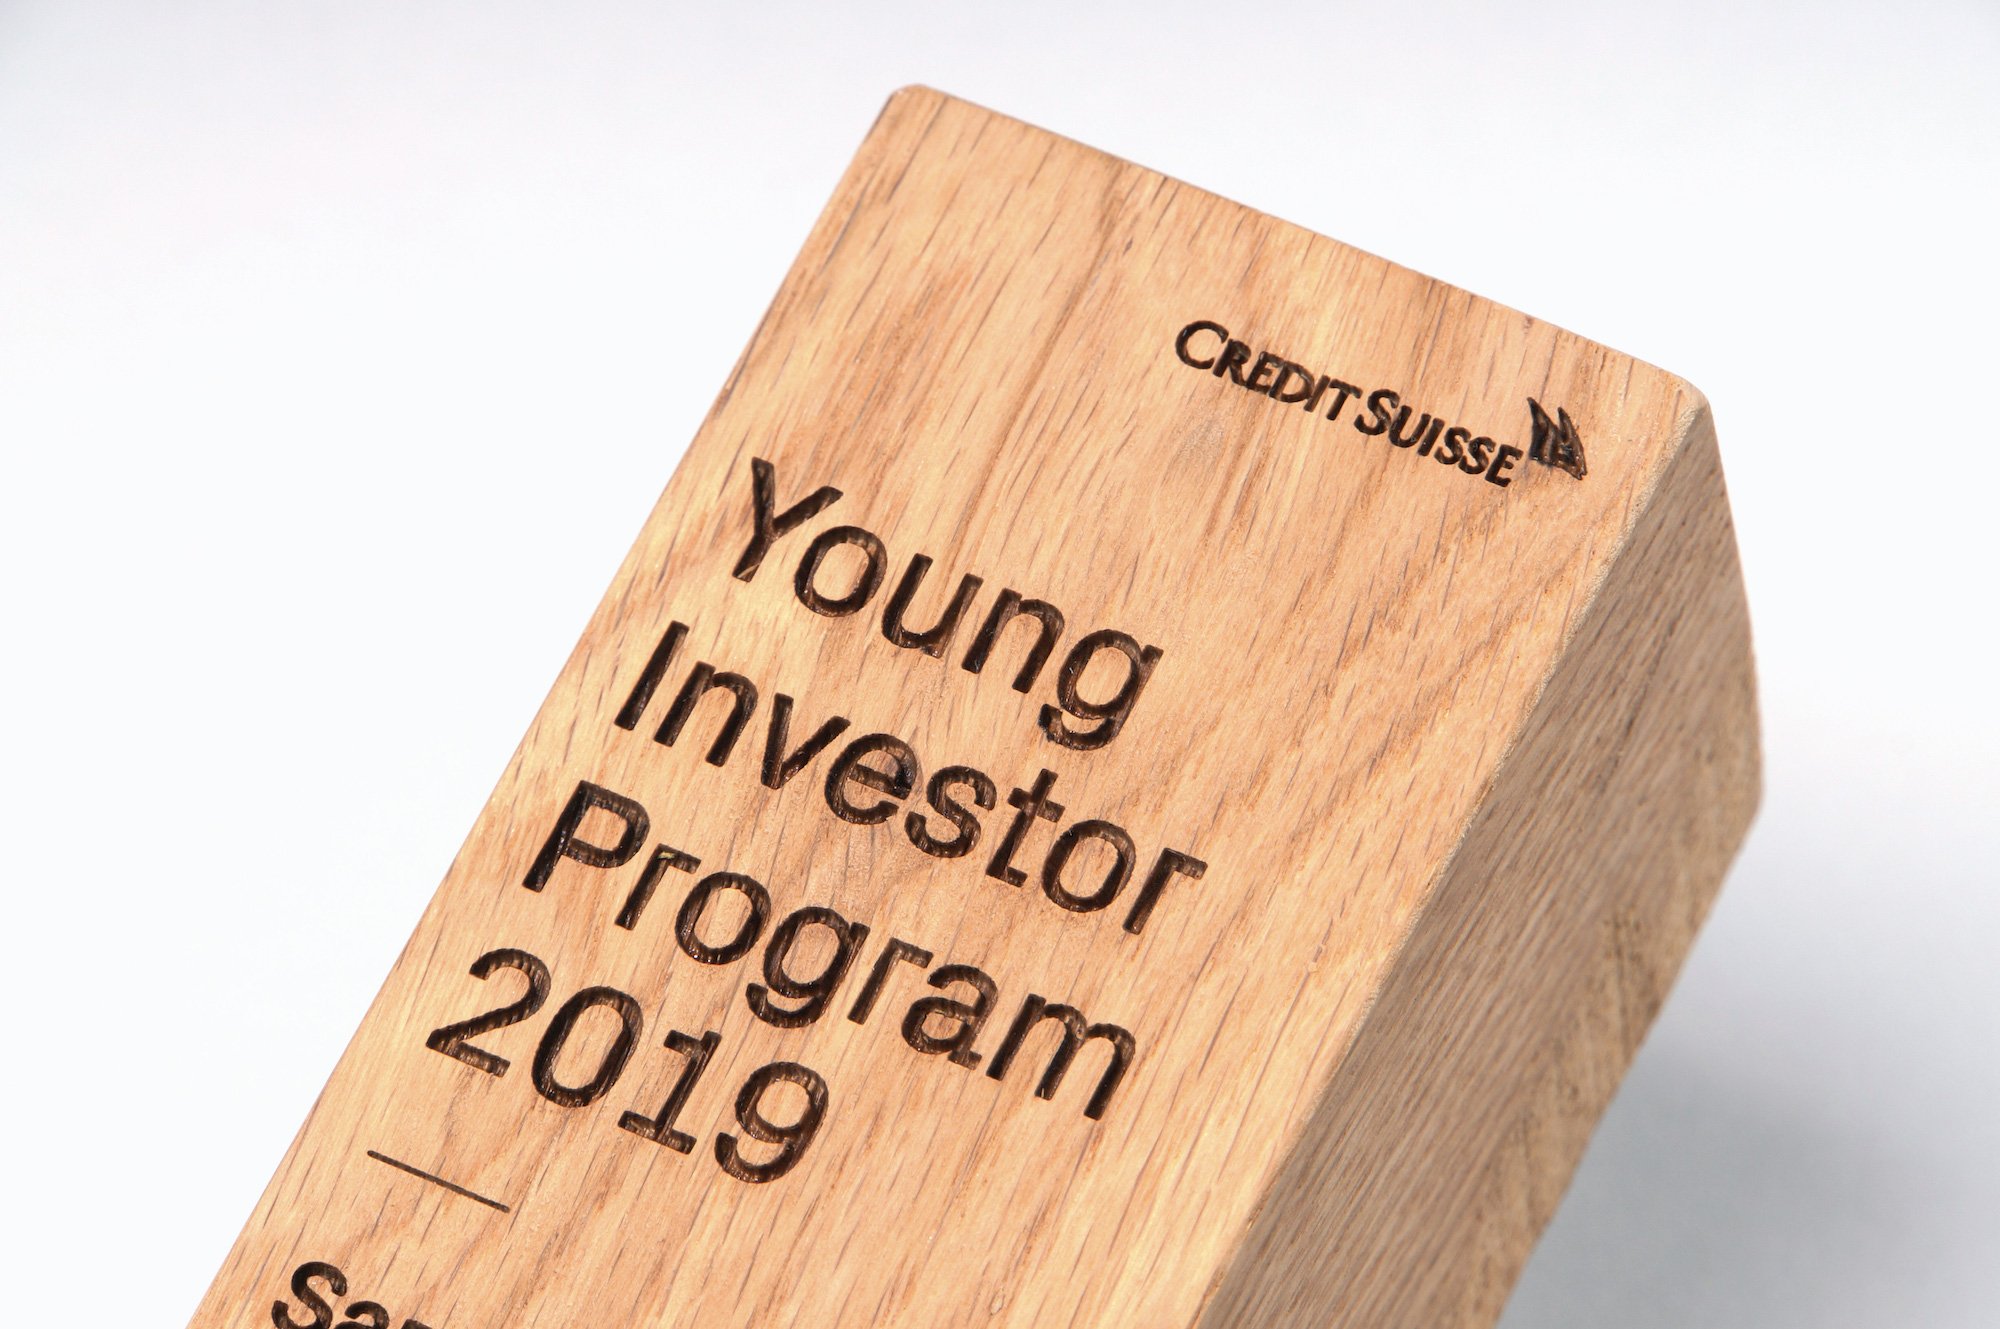 Programme Credit Suisse Young Investor 2019